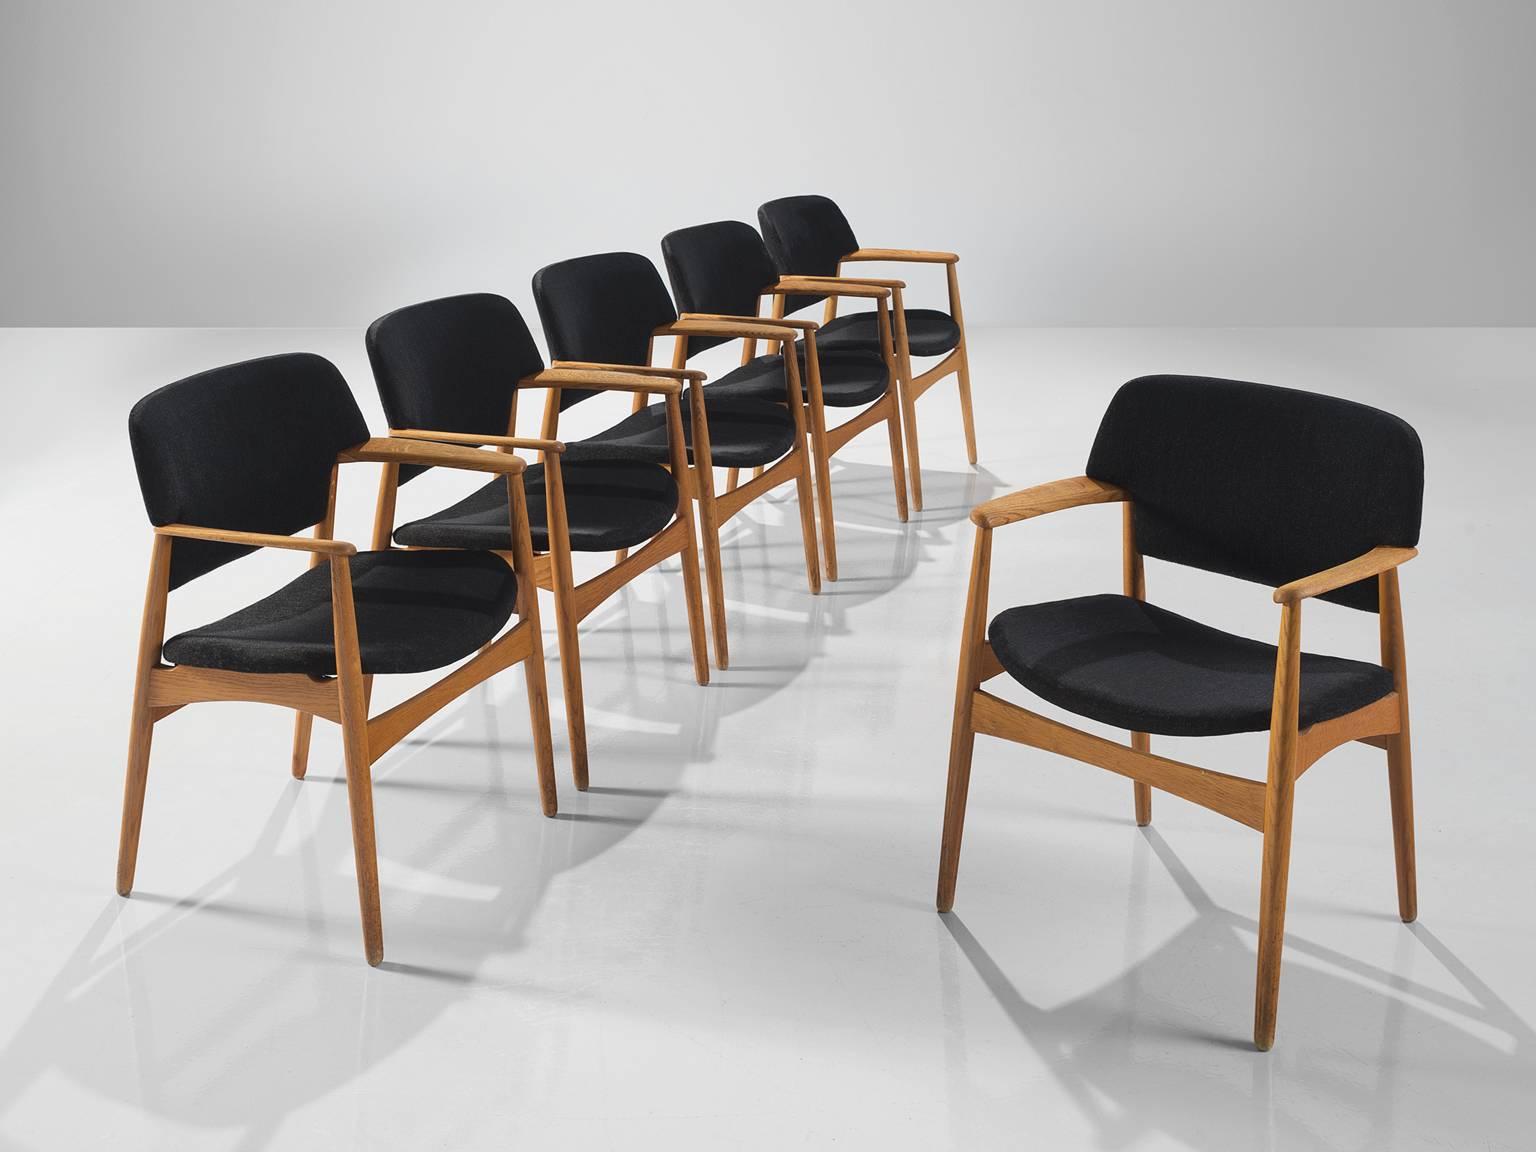 Aksel Bender Madsen for Fritz Hansen, oak and black fabric, Denmark, circa 1955

These wide dining chairs are executed with a rounded back. The chairs feature a blond oak frame that forms a great colour palette with the black fabric. The chairs are